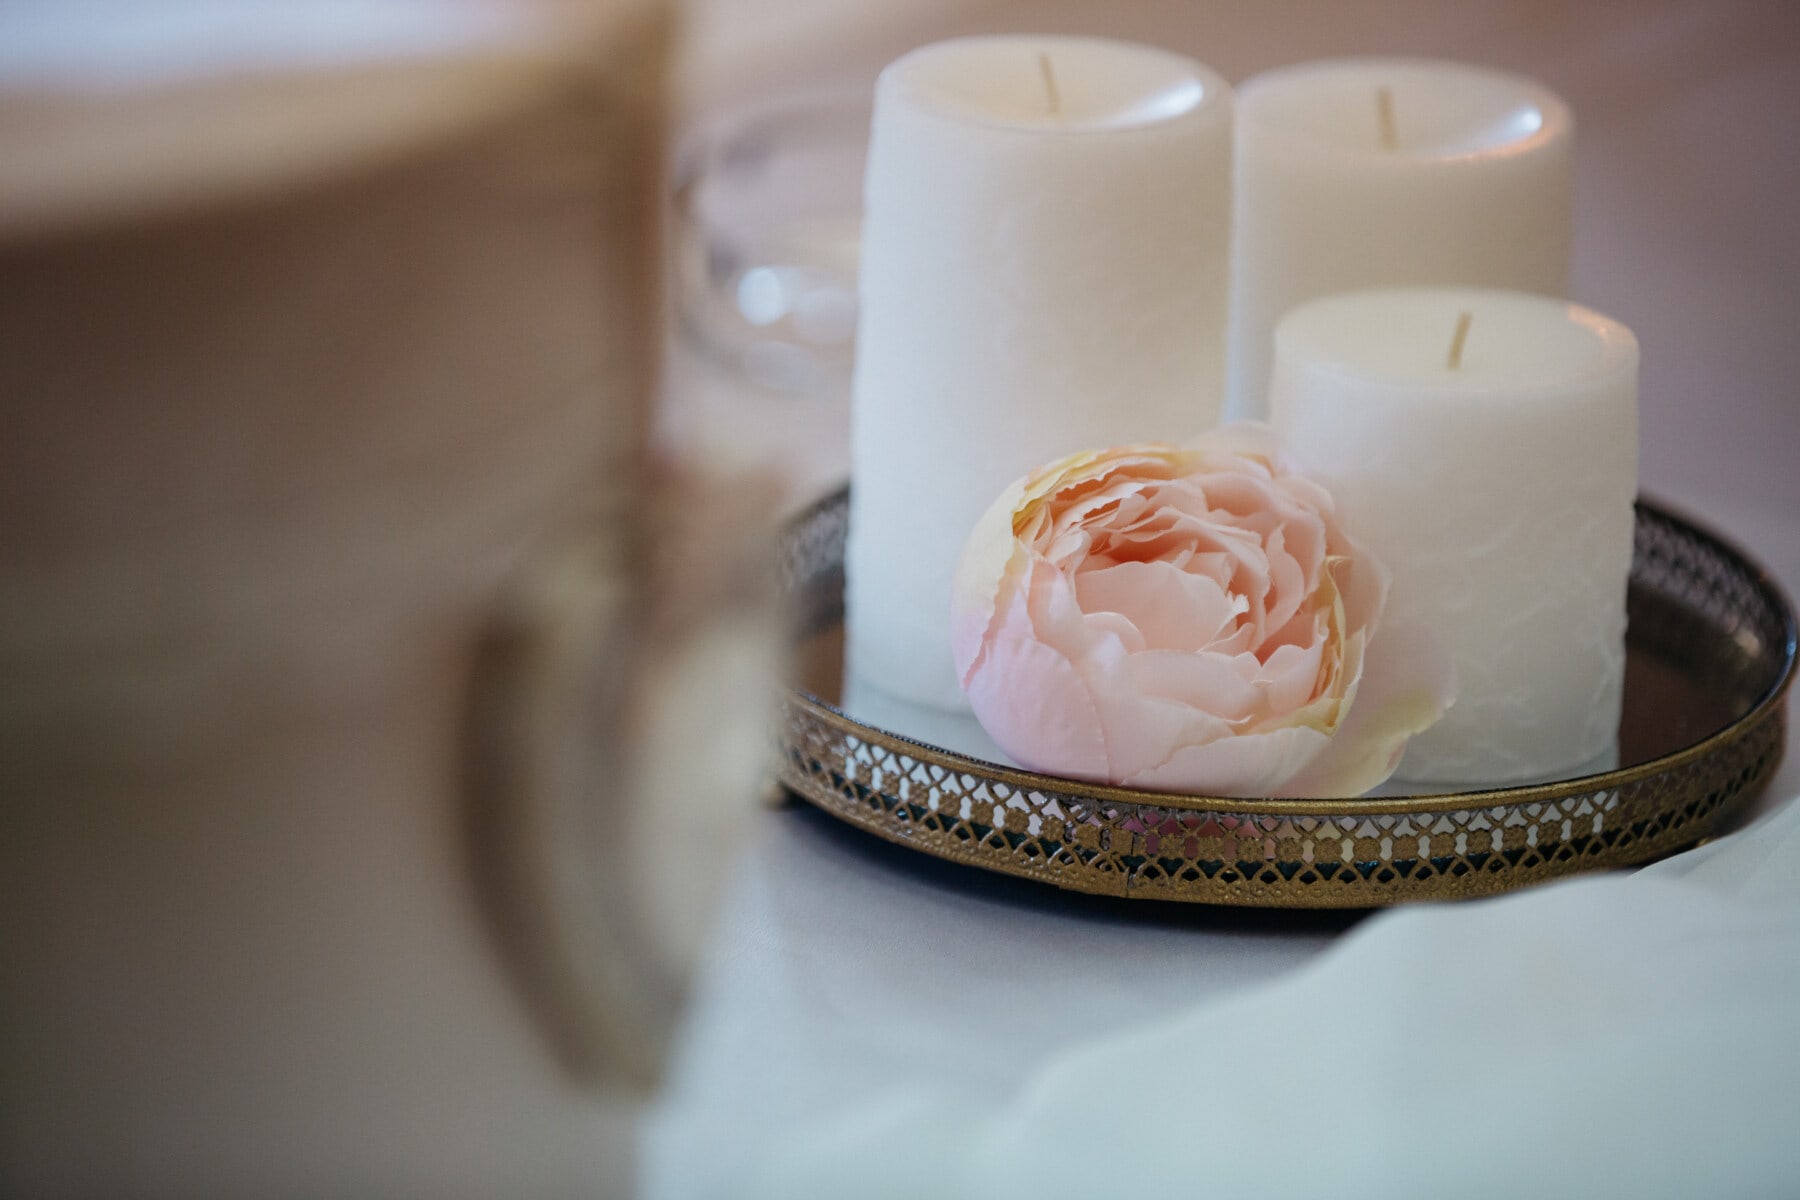 rose, pinkish, pastel, candles, white, tableware, still life, candle, flower, indoors